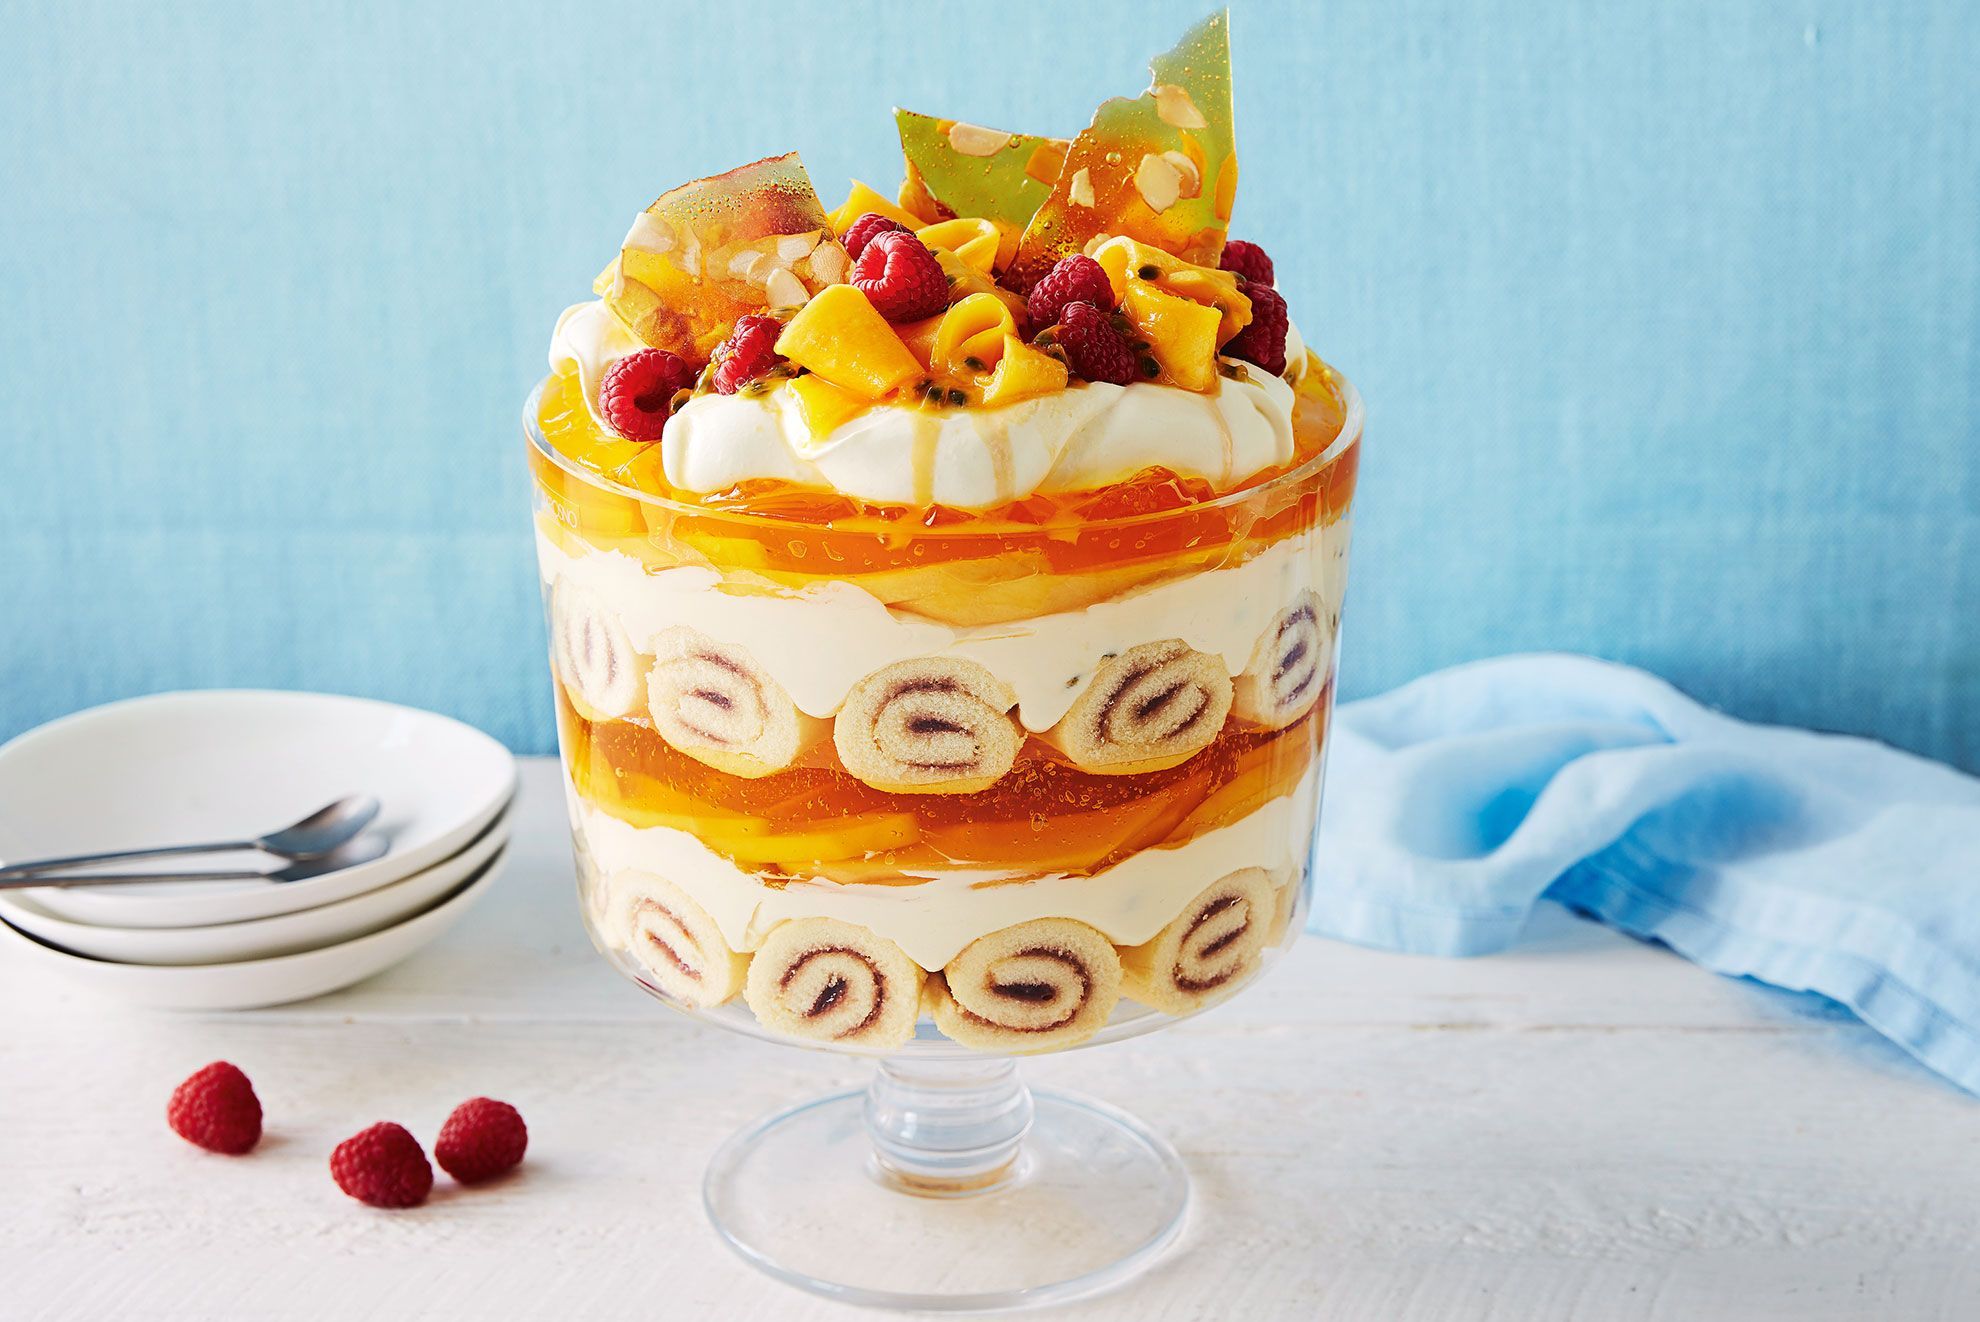  10 Easy Steps to Making a Passionfruit and White Chocolate Trifle